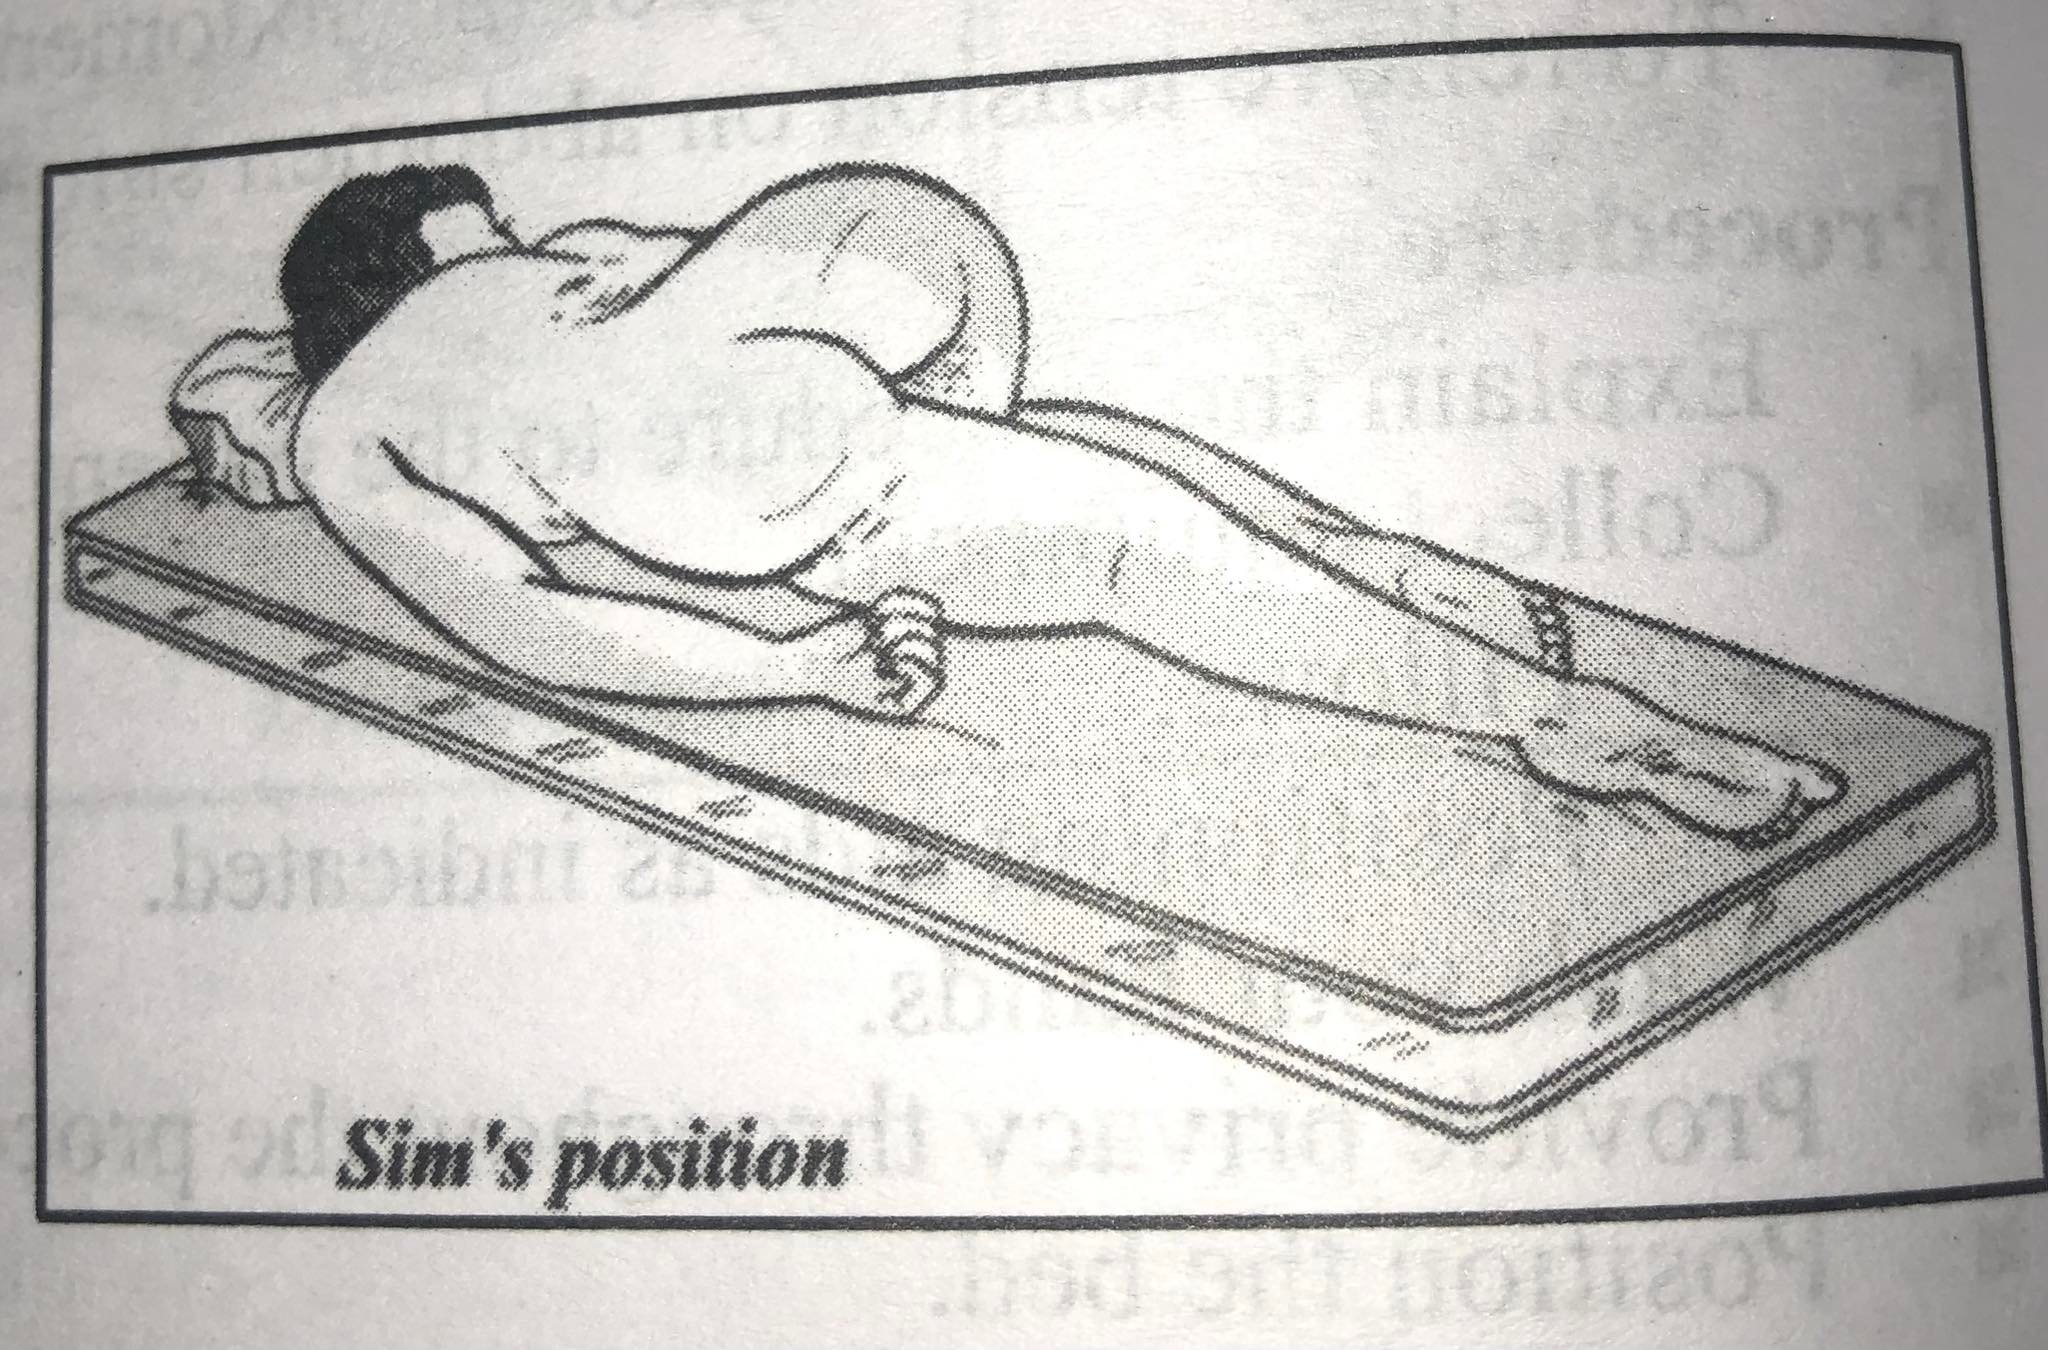 Supine position for casting